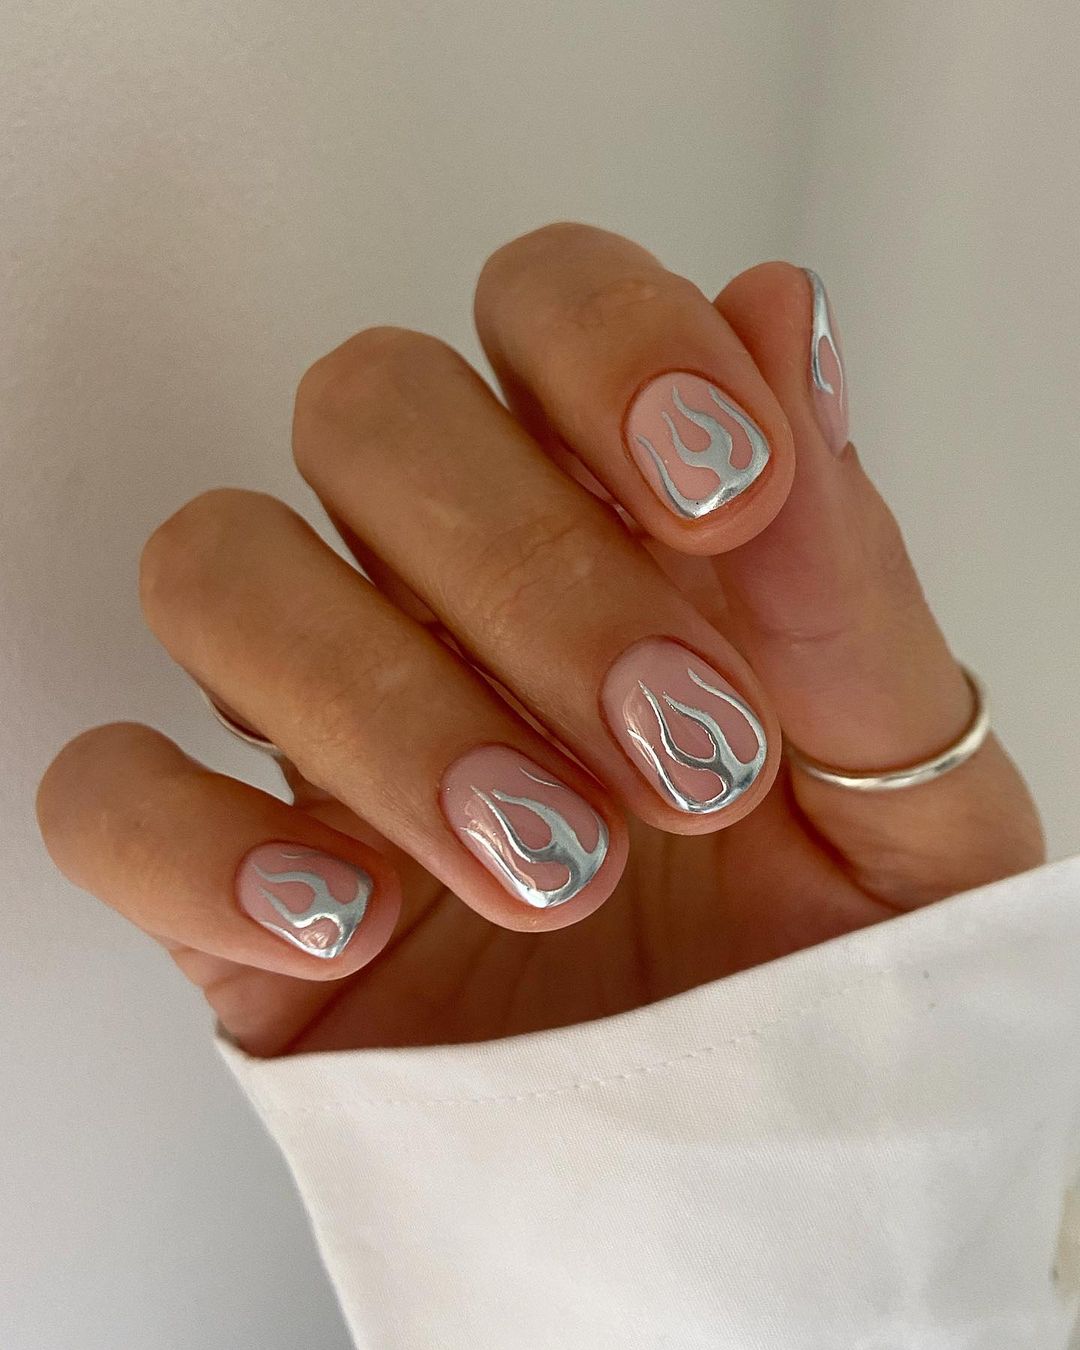 Stay Cool and Chic: Summer Short Acrylic Nail Designs